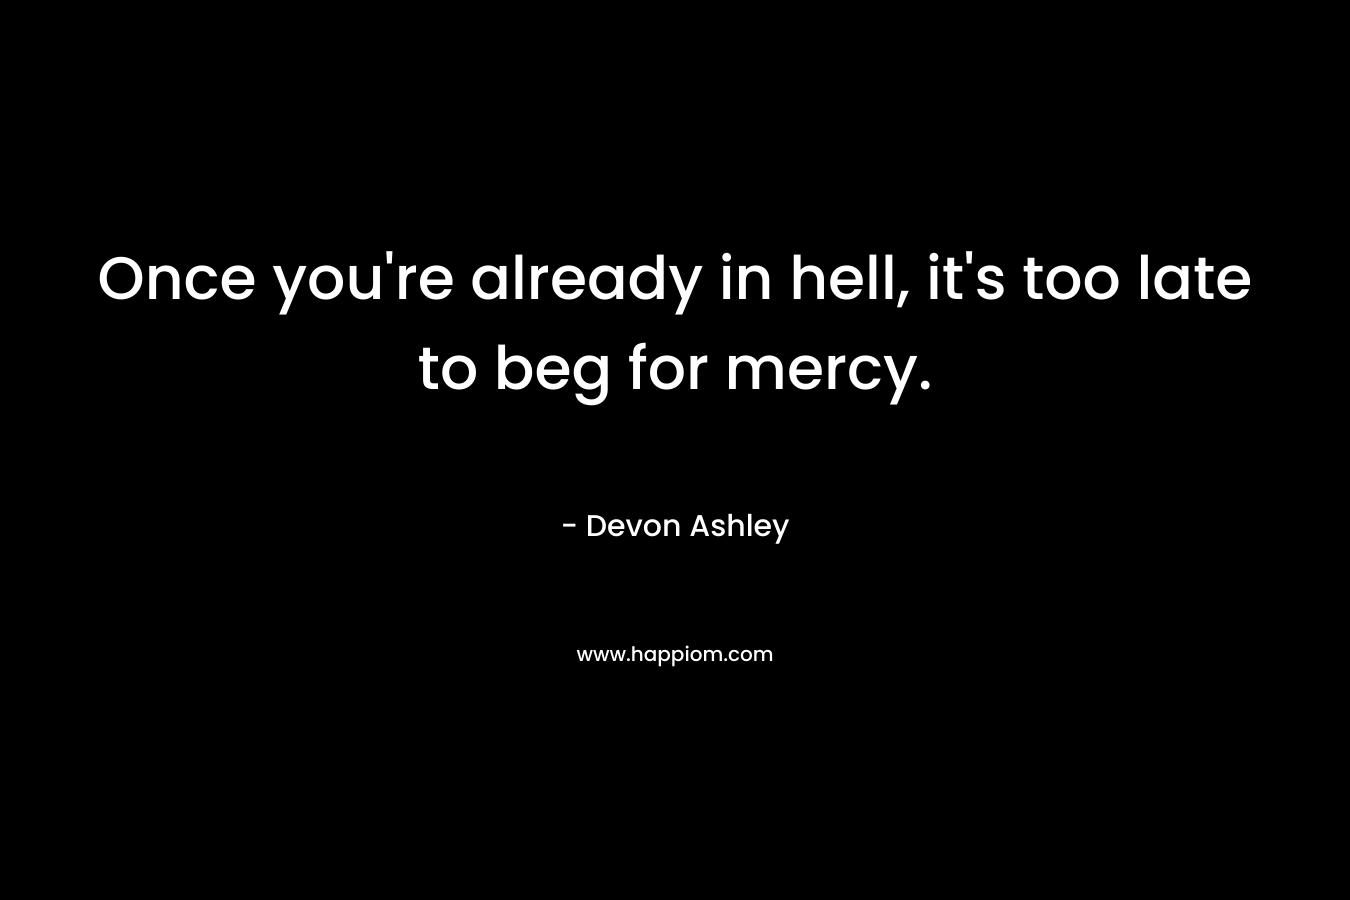 Once you’re already in hell, it’s too late to beg for mercy. – Devon Ashley